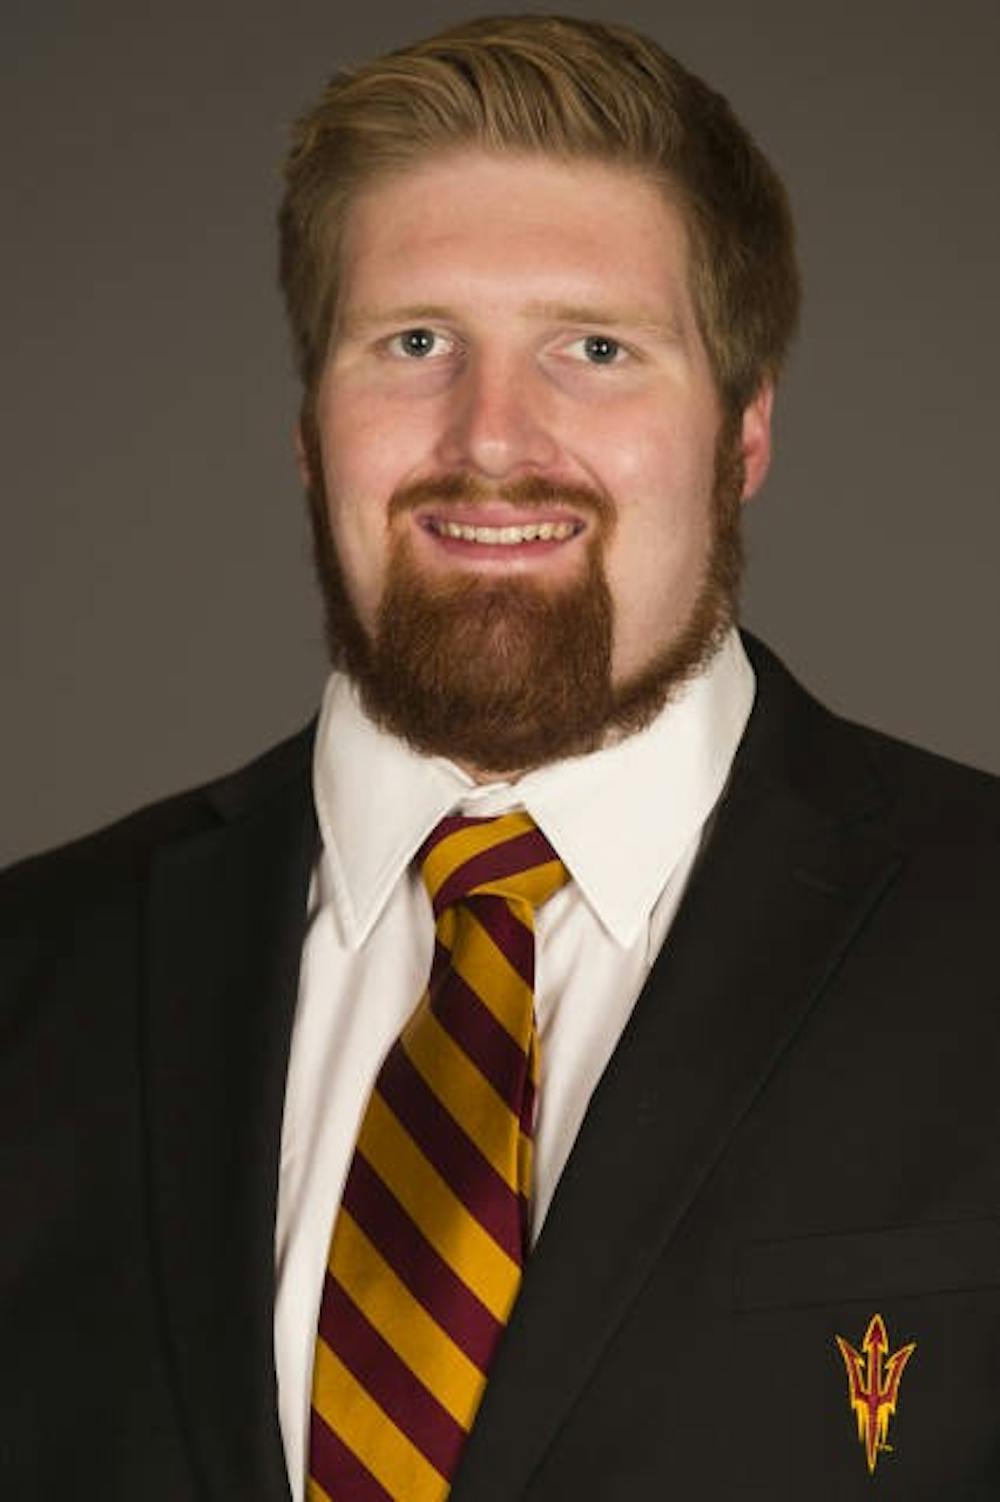 Fifth year offensive lineman Chip Sarafin became the first openly gay active athlete in Division I college football. (Photo courtesy of Sun Devil Athletics)